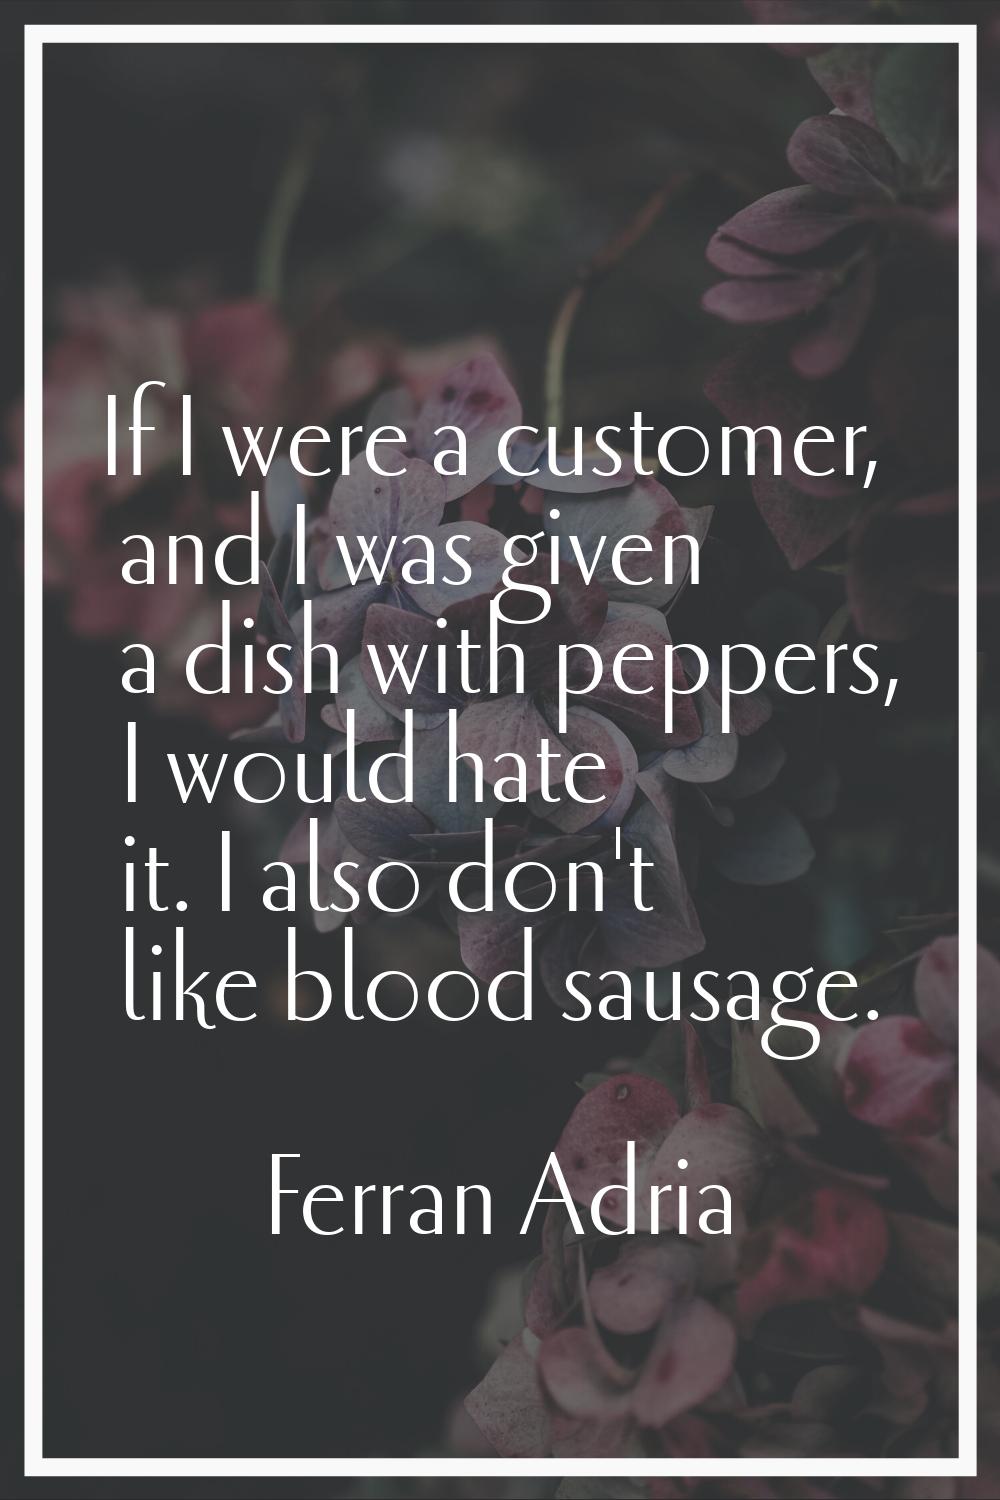 If I were a customer, and I was given a dish with peppers, I would hate it. I also don't like blood